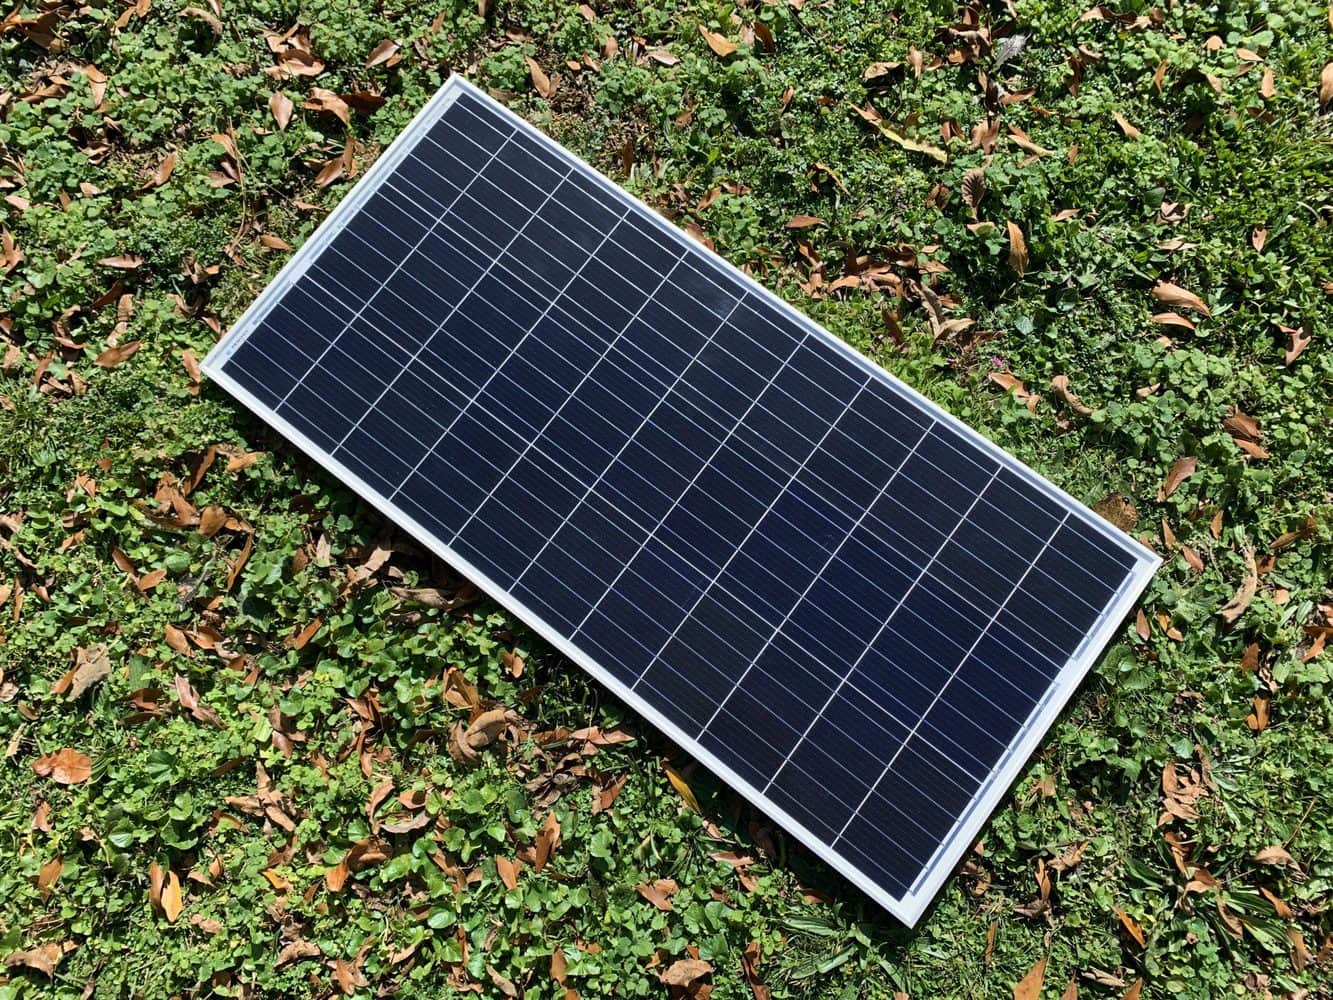 100W Monocrystalline Solar Panel Kit for Off-Grid Homes, RVs, and Boats - Includes Mounting Brackets, Charge Controller, and Solar Cables